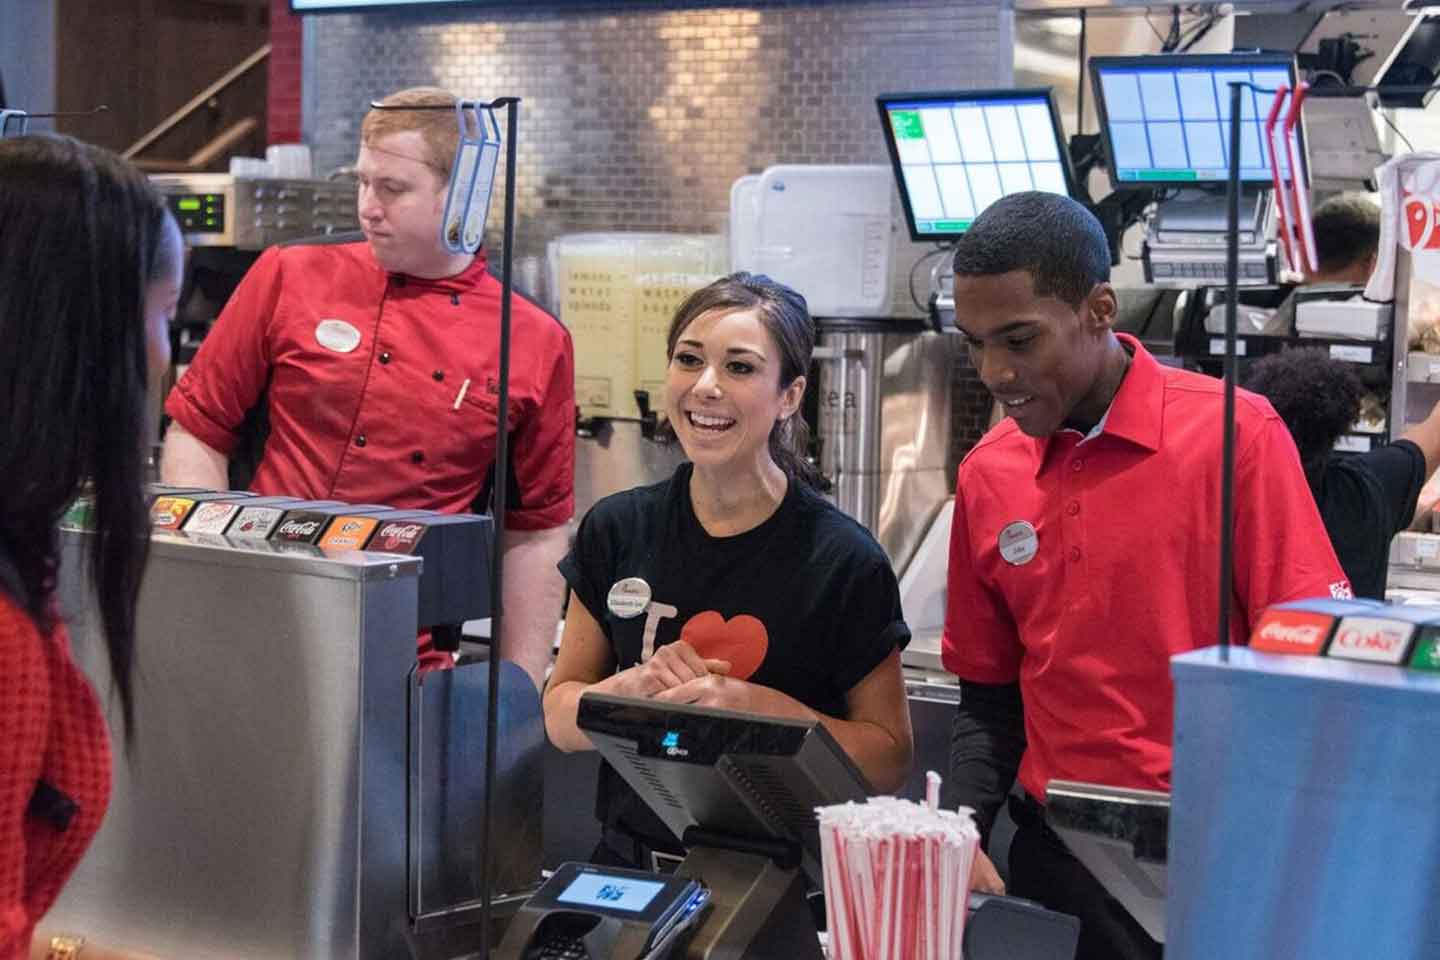 Chick Fil A Hours of Operation Opening, Closing, Weekend, Special